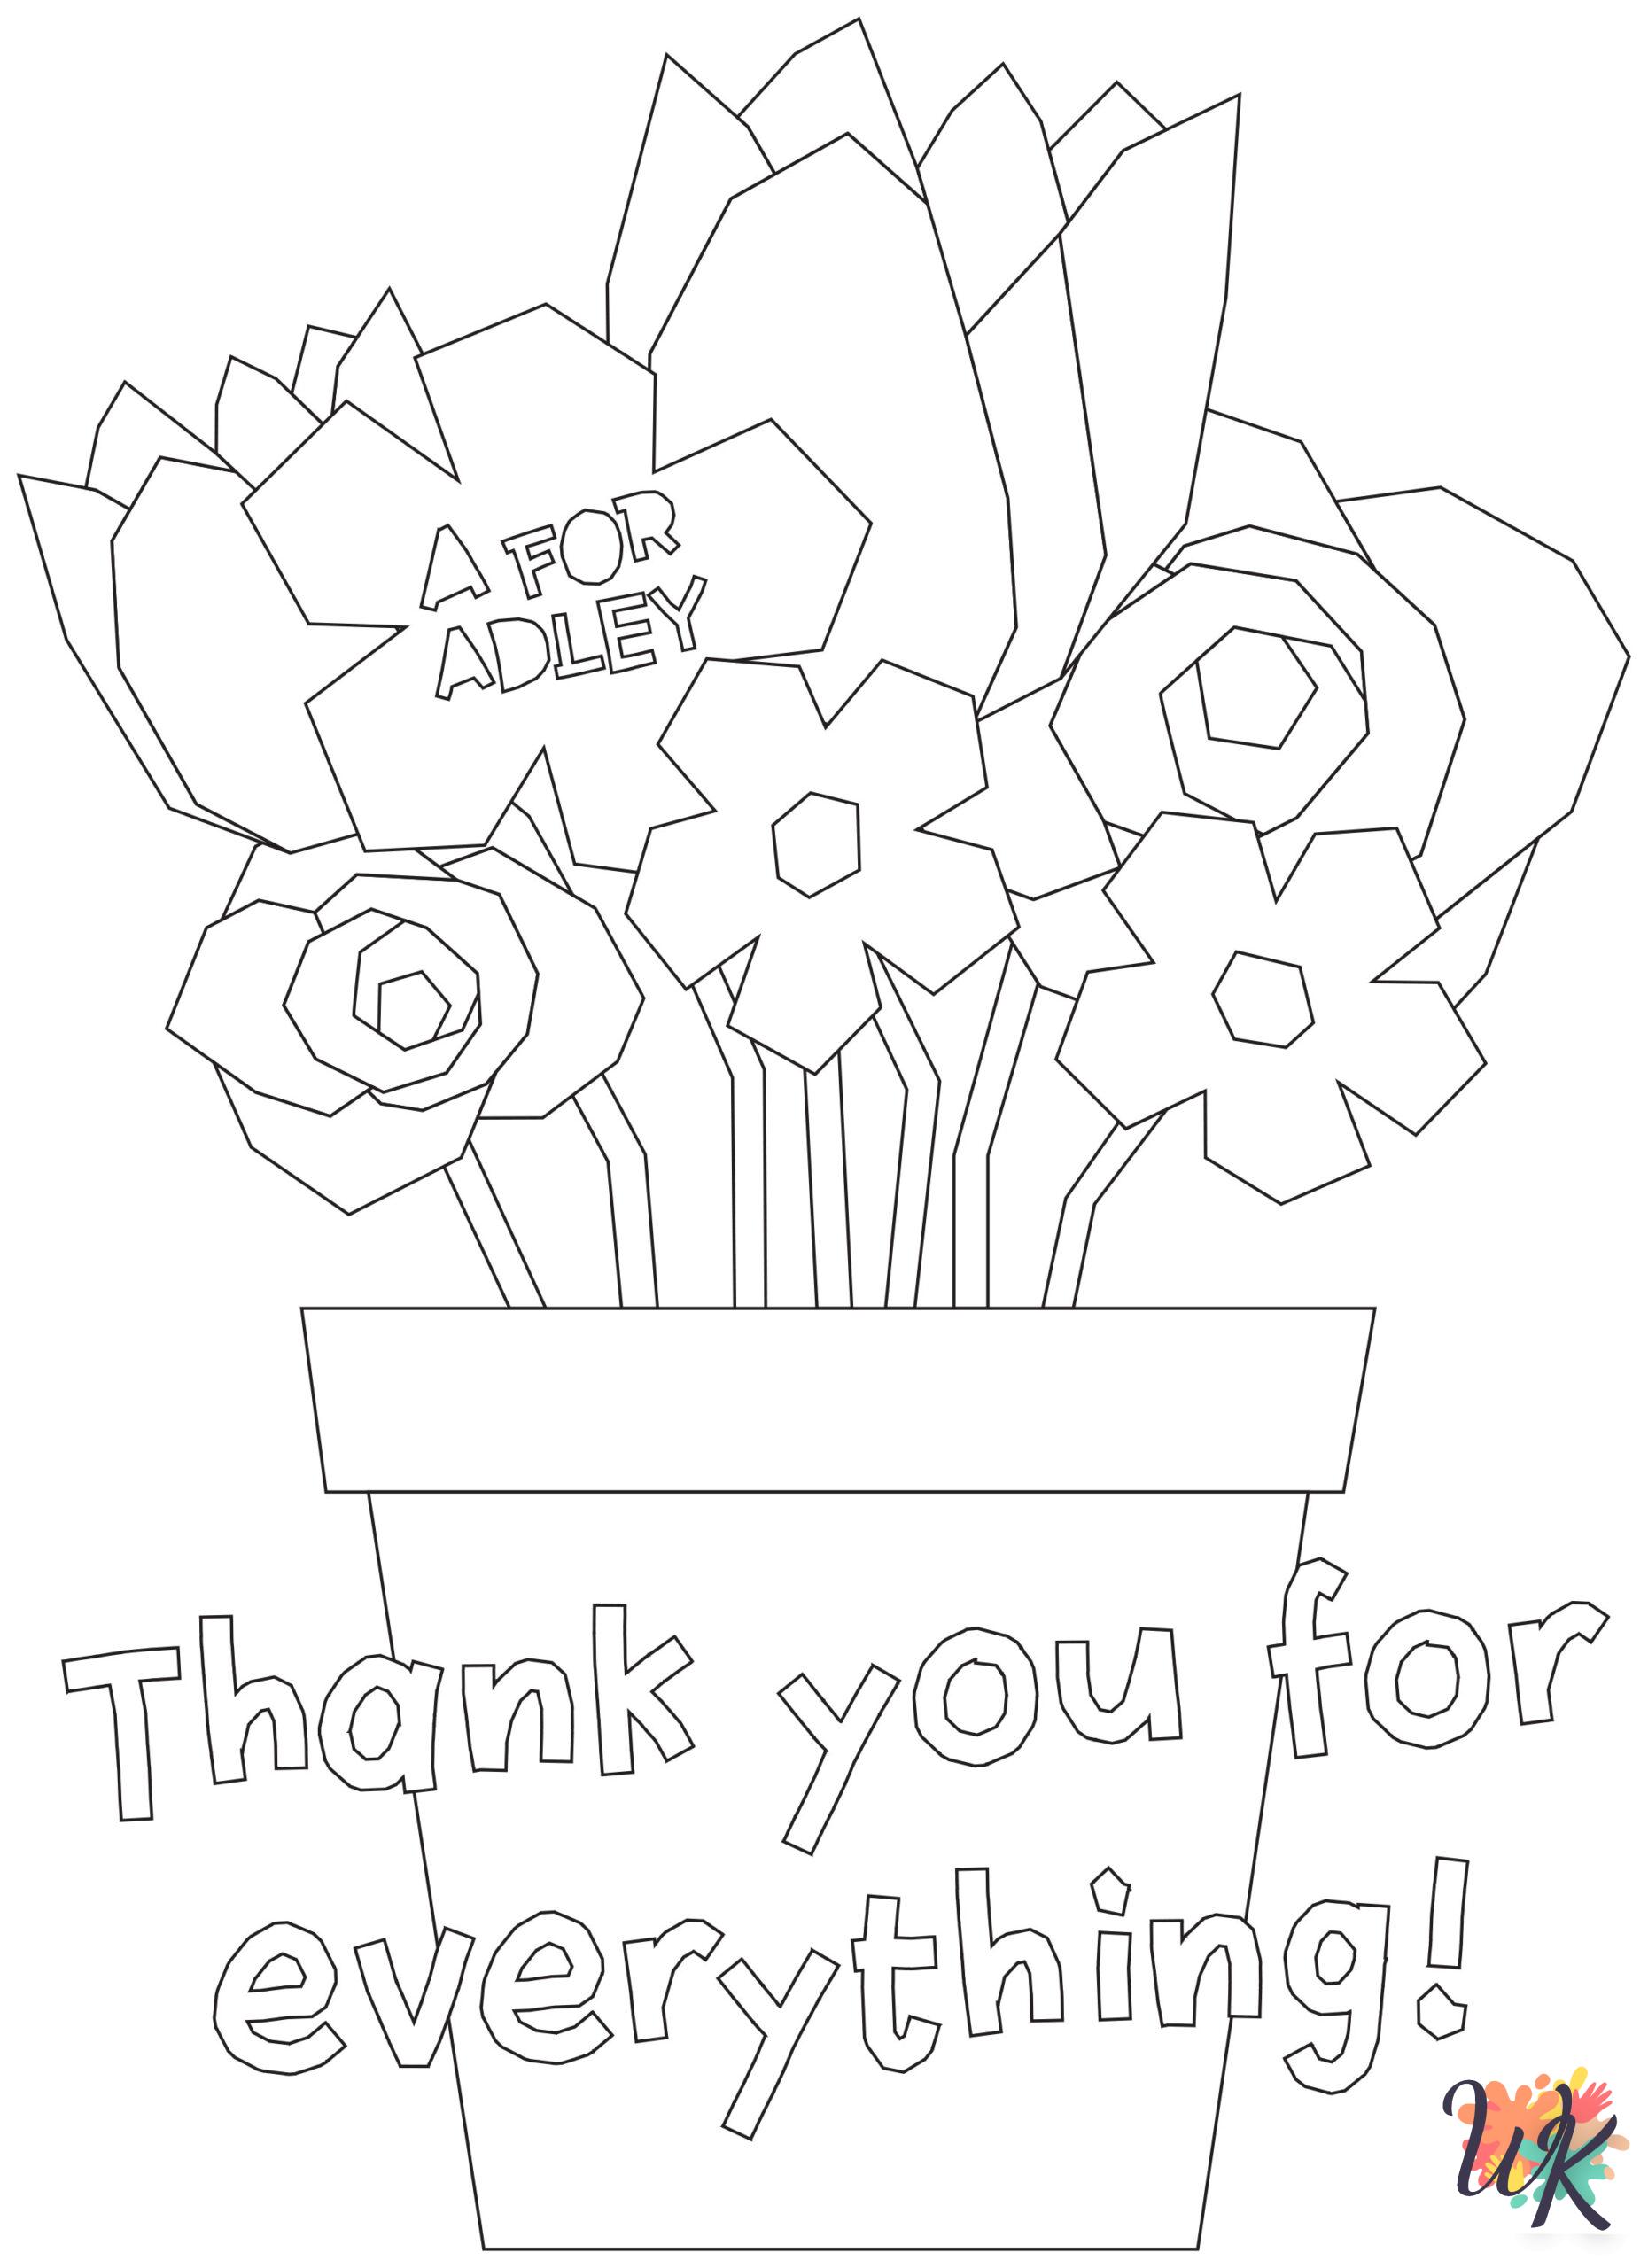 free A For Adley coloring pages printable